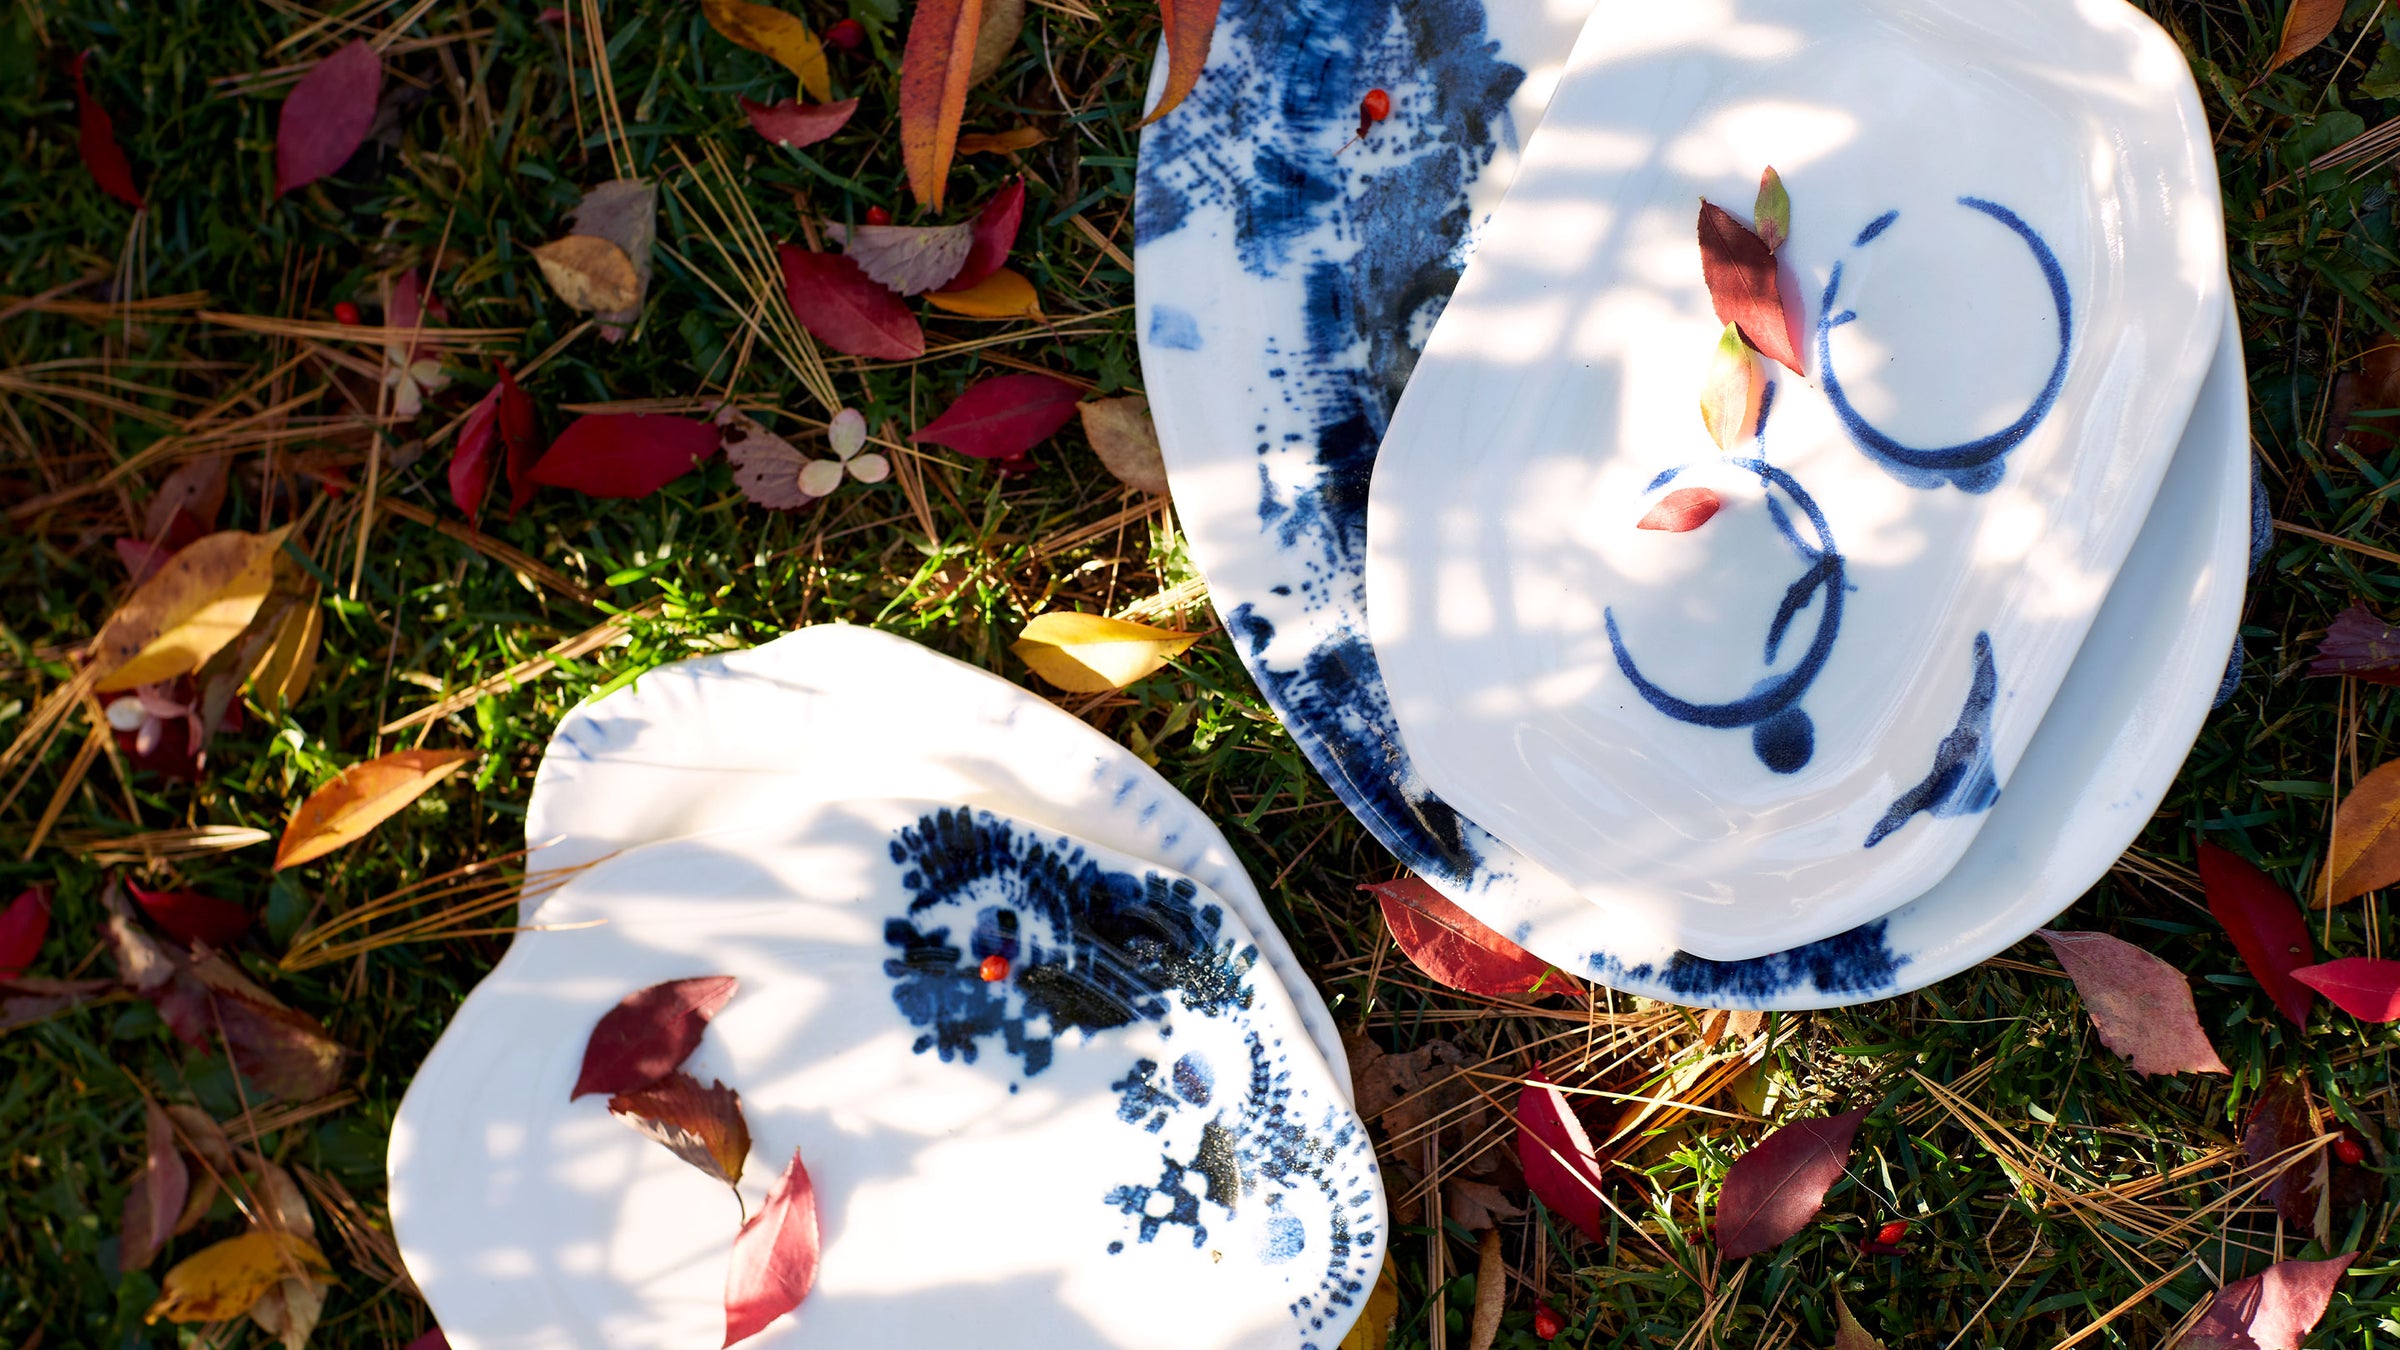 DBO HOME one of a kind handmade ceramic plates with indigo glaze on sunny autumn grass with leaves and pine needles